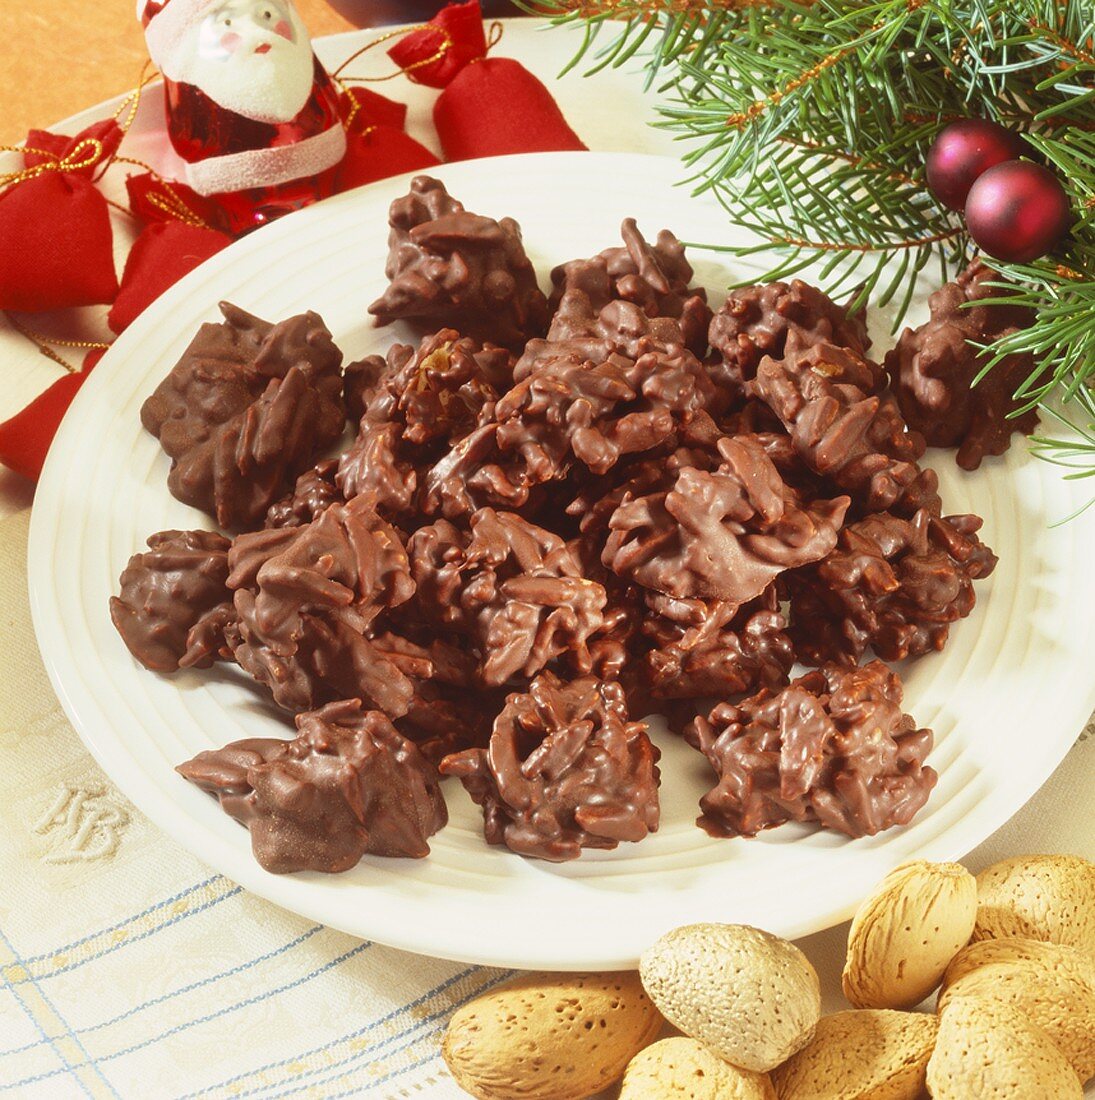 Chocolate almond clusters on a plate